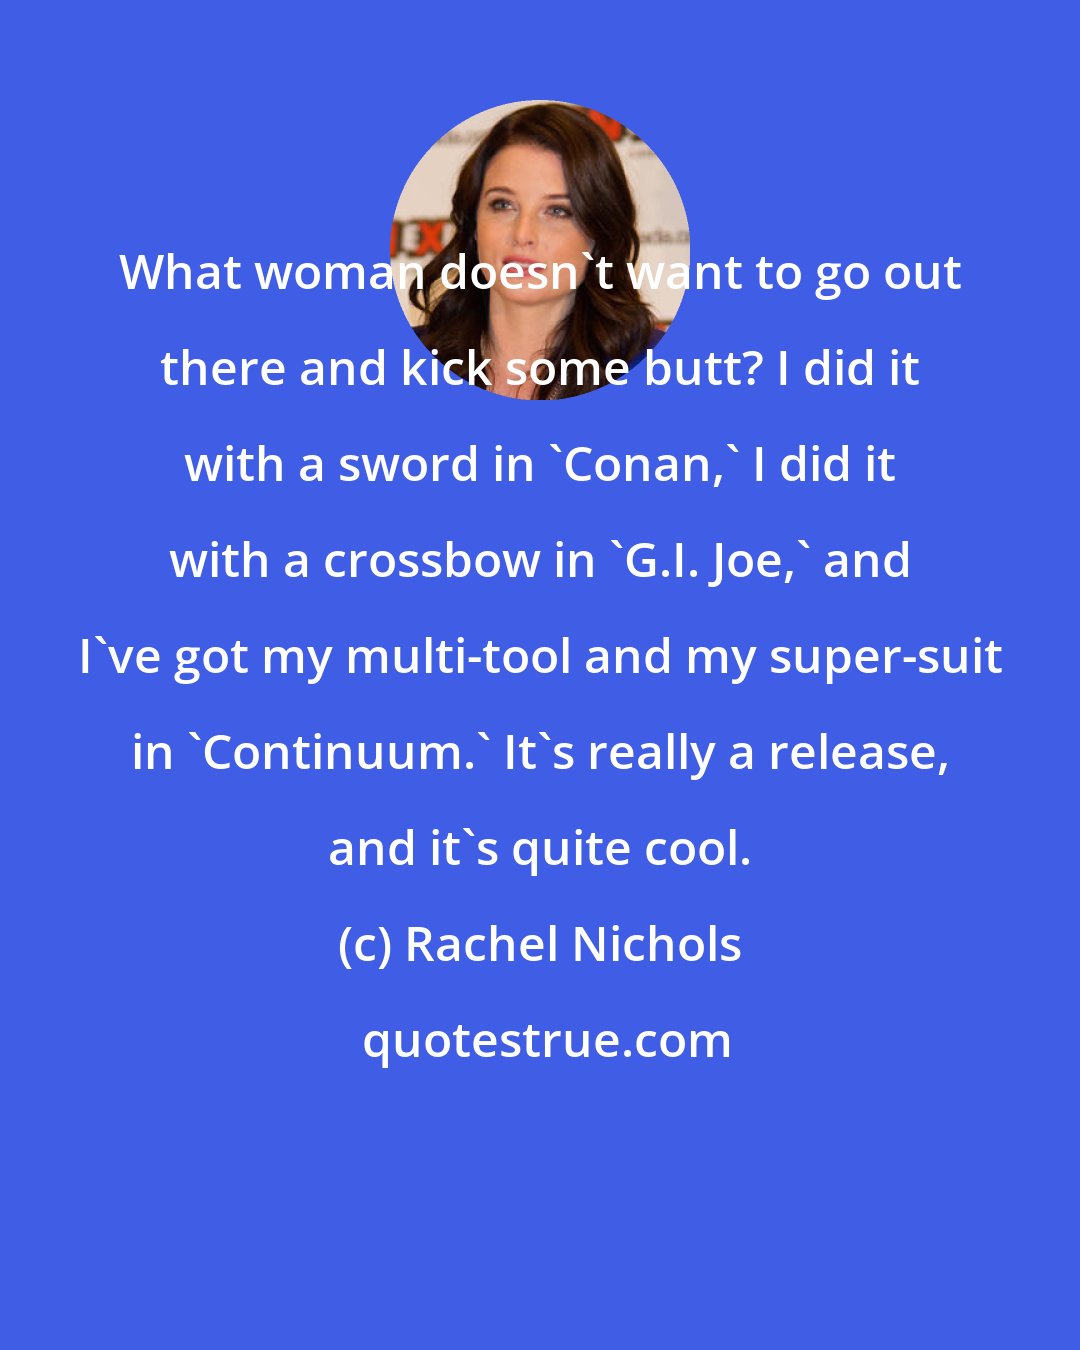 Rachel Nichols: What woman doesn't want to go out there and kick some butt? I did it with a sword in 'Conan,' I did it with a crossbow in 'G.I. Joe,' and I've got my multi-tool and my super-suit in 'Continuum.' It's really a release, and it's quite cool.